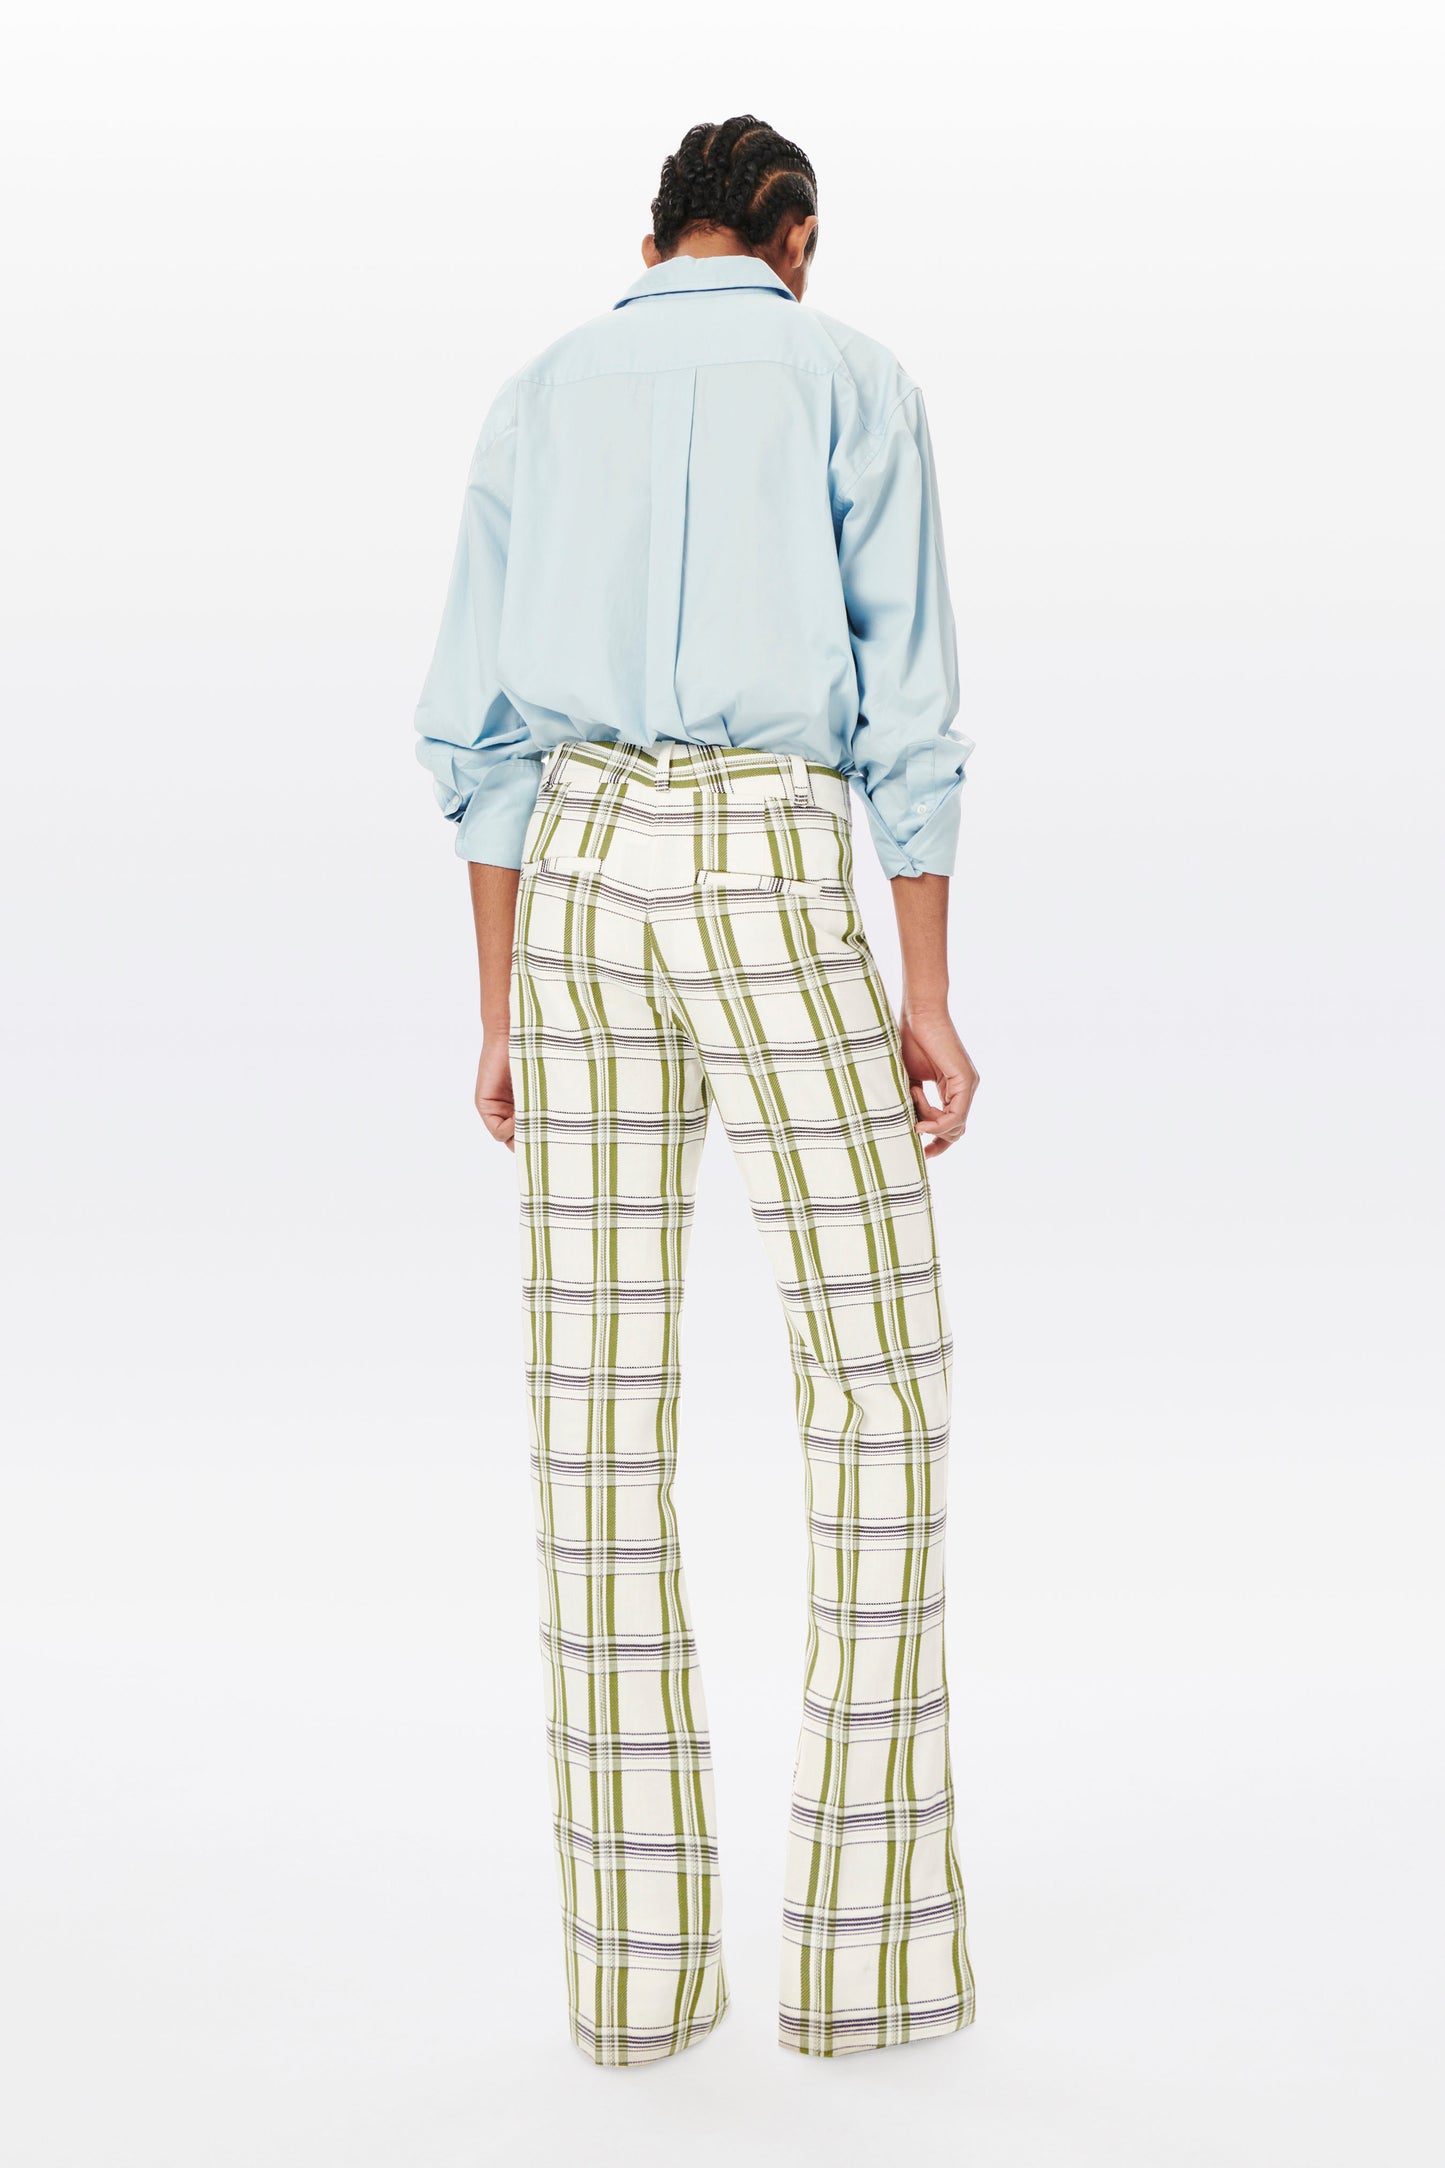 Relaxed Tailored Trouser in Off White, Navy and Khaki Check